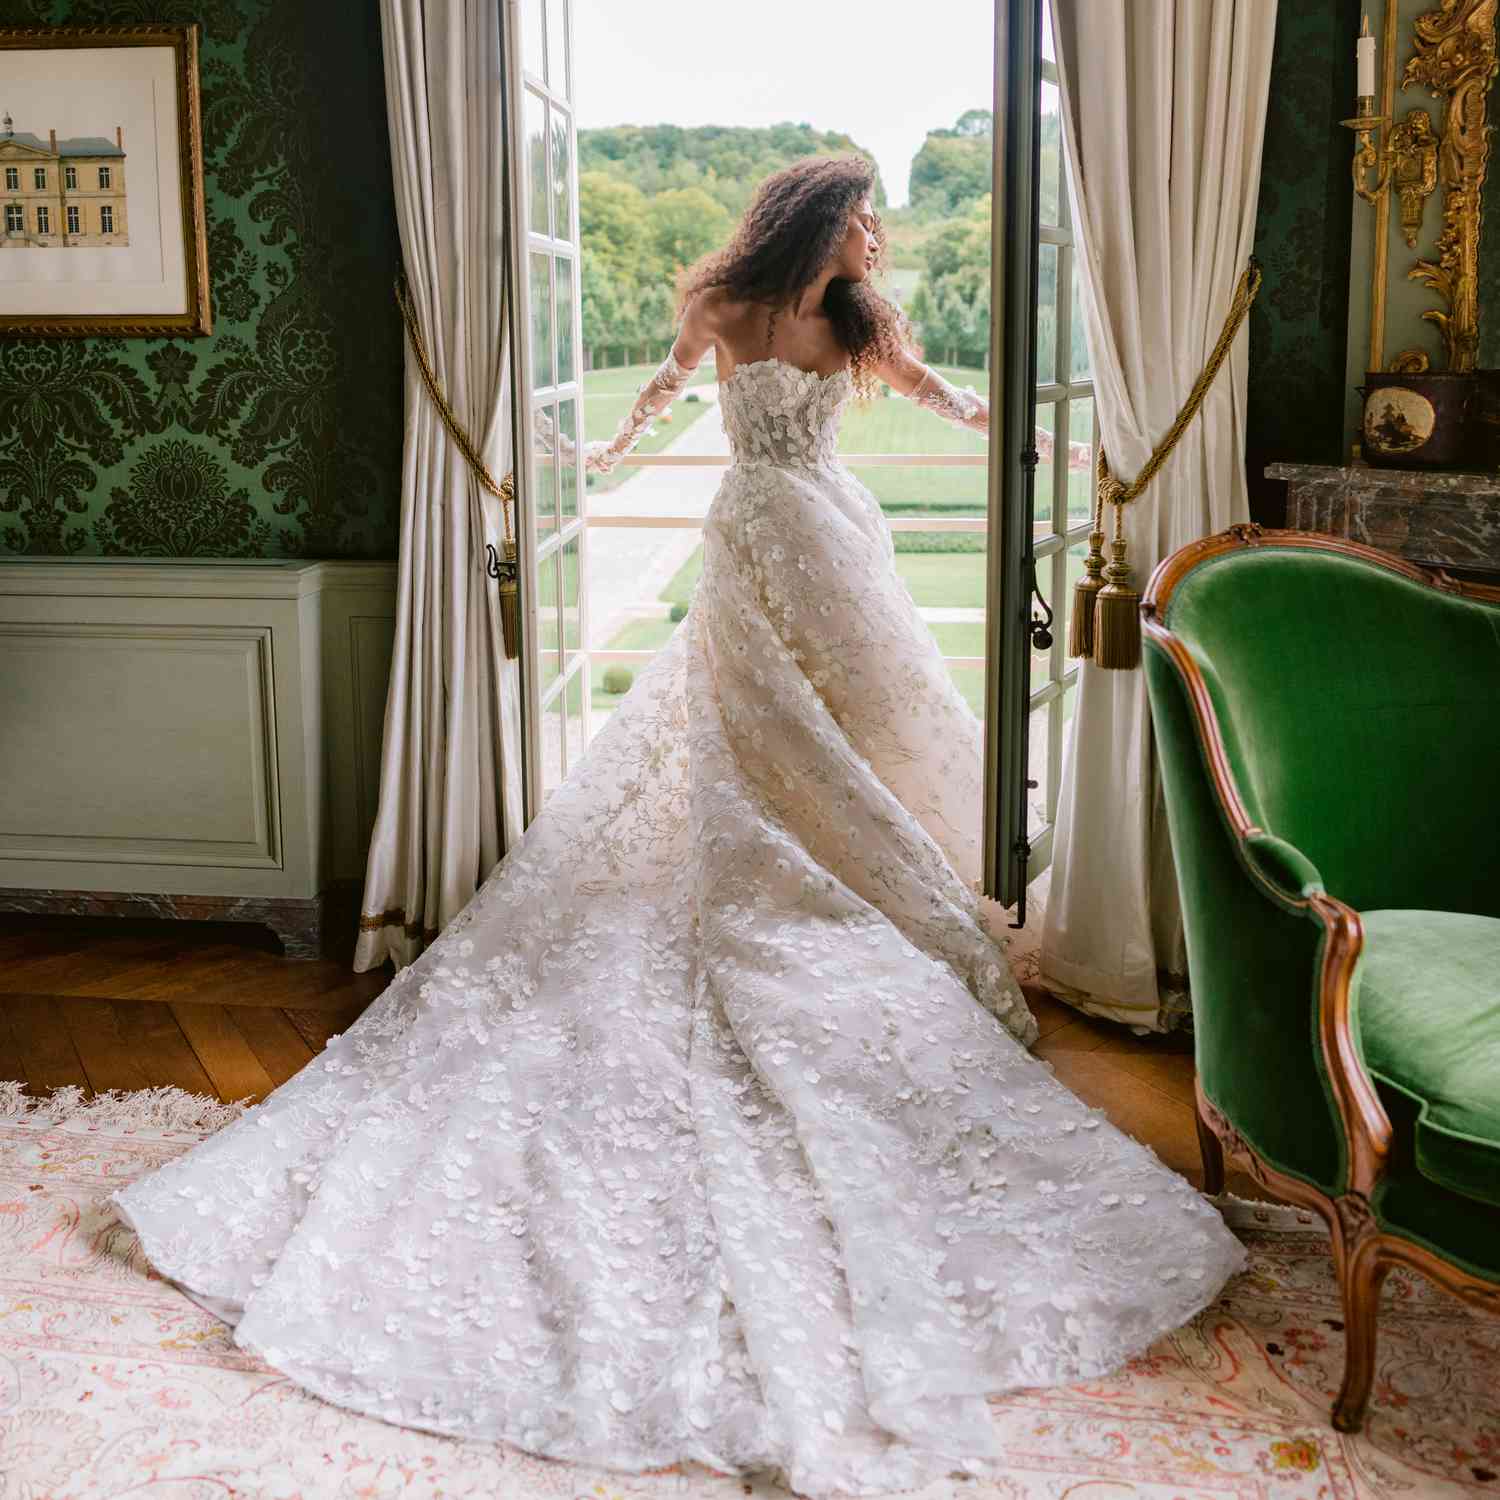 10 things a bride should consider when planning their wedding: